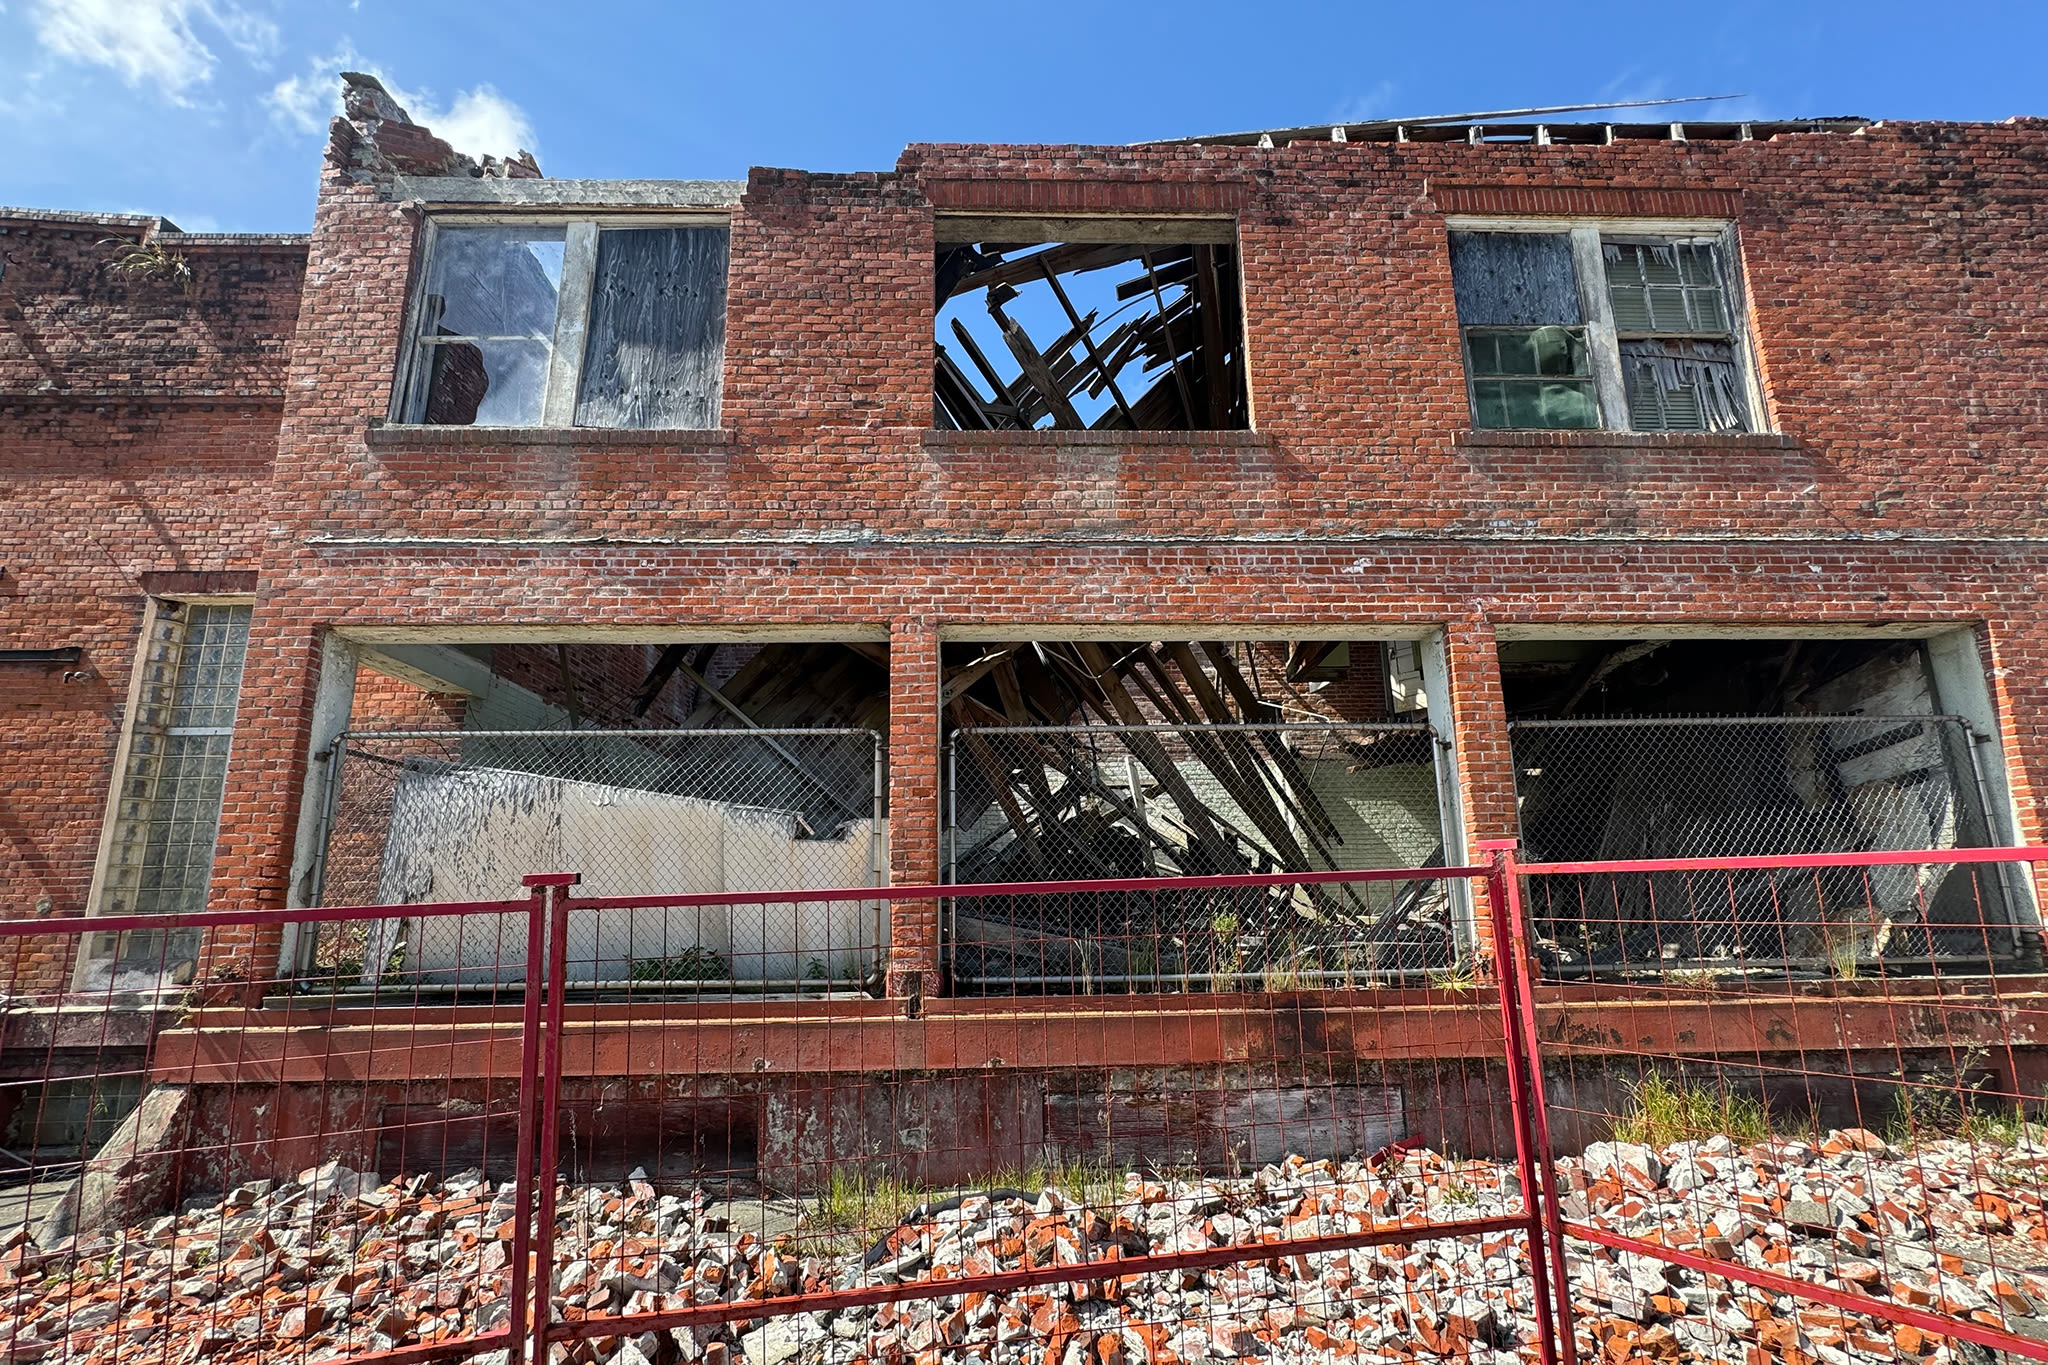 Iconic Northern California filming location turned to rubble